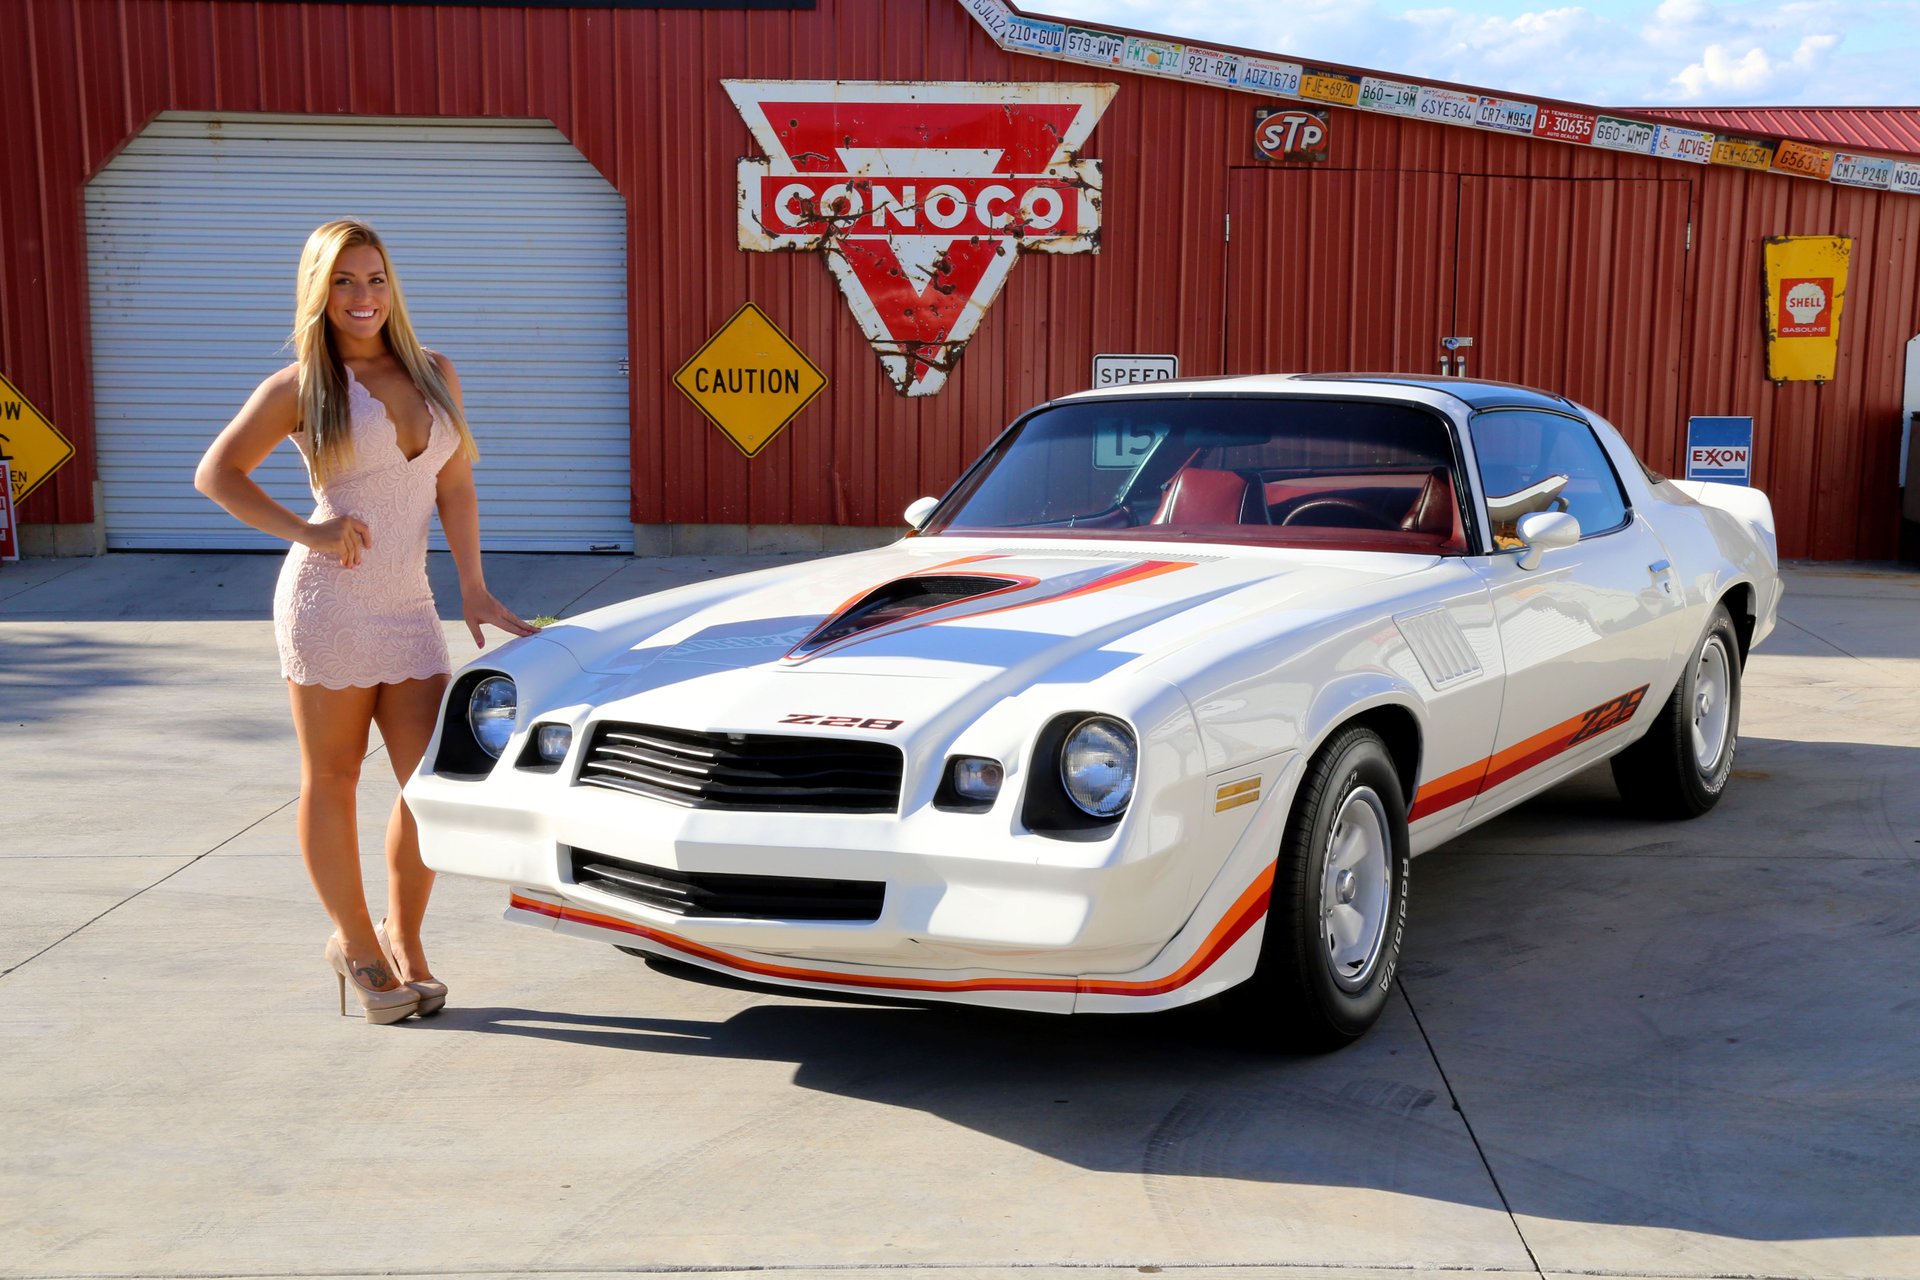 1979 Chevrolet Camaro | Classic Cars & Muscle Cars For Sale in Knoxville TN